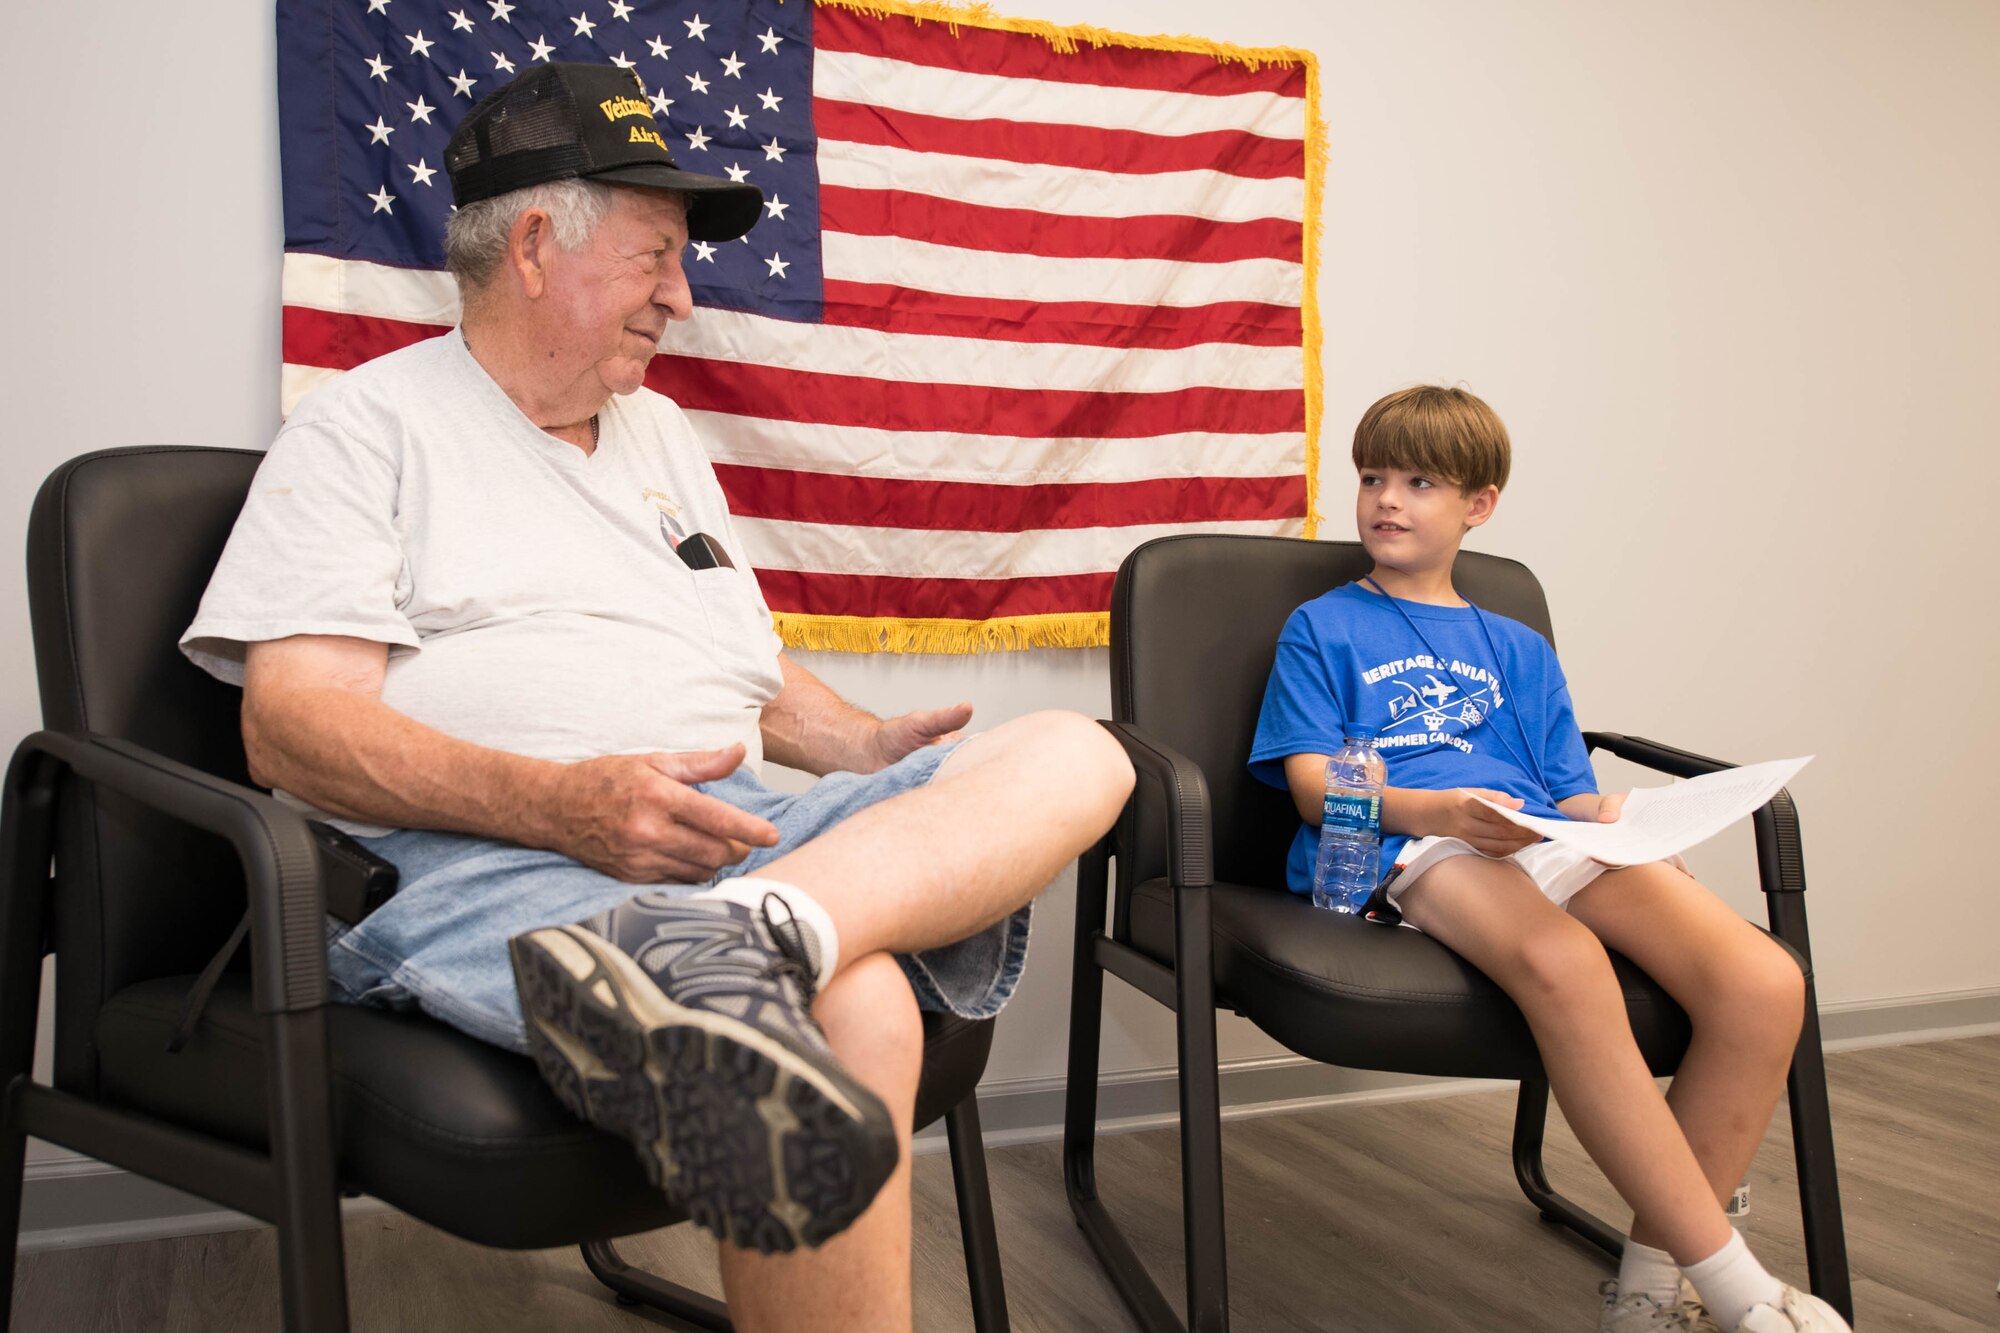 Rhys Cramer interviews Don Hall, Air Mobility Command Museum volunteer and Air Force veteran, during a 2021 Aviation Summer Camp at the AMC Museum in Dover, Delaware, July 1, 2021. During the interview, Hall, a Vietnam War veteran, discussed his military experiences. (U.S. Air Force photo by Mauricio Campino)